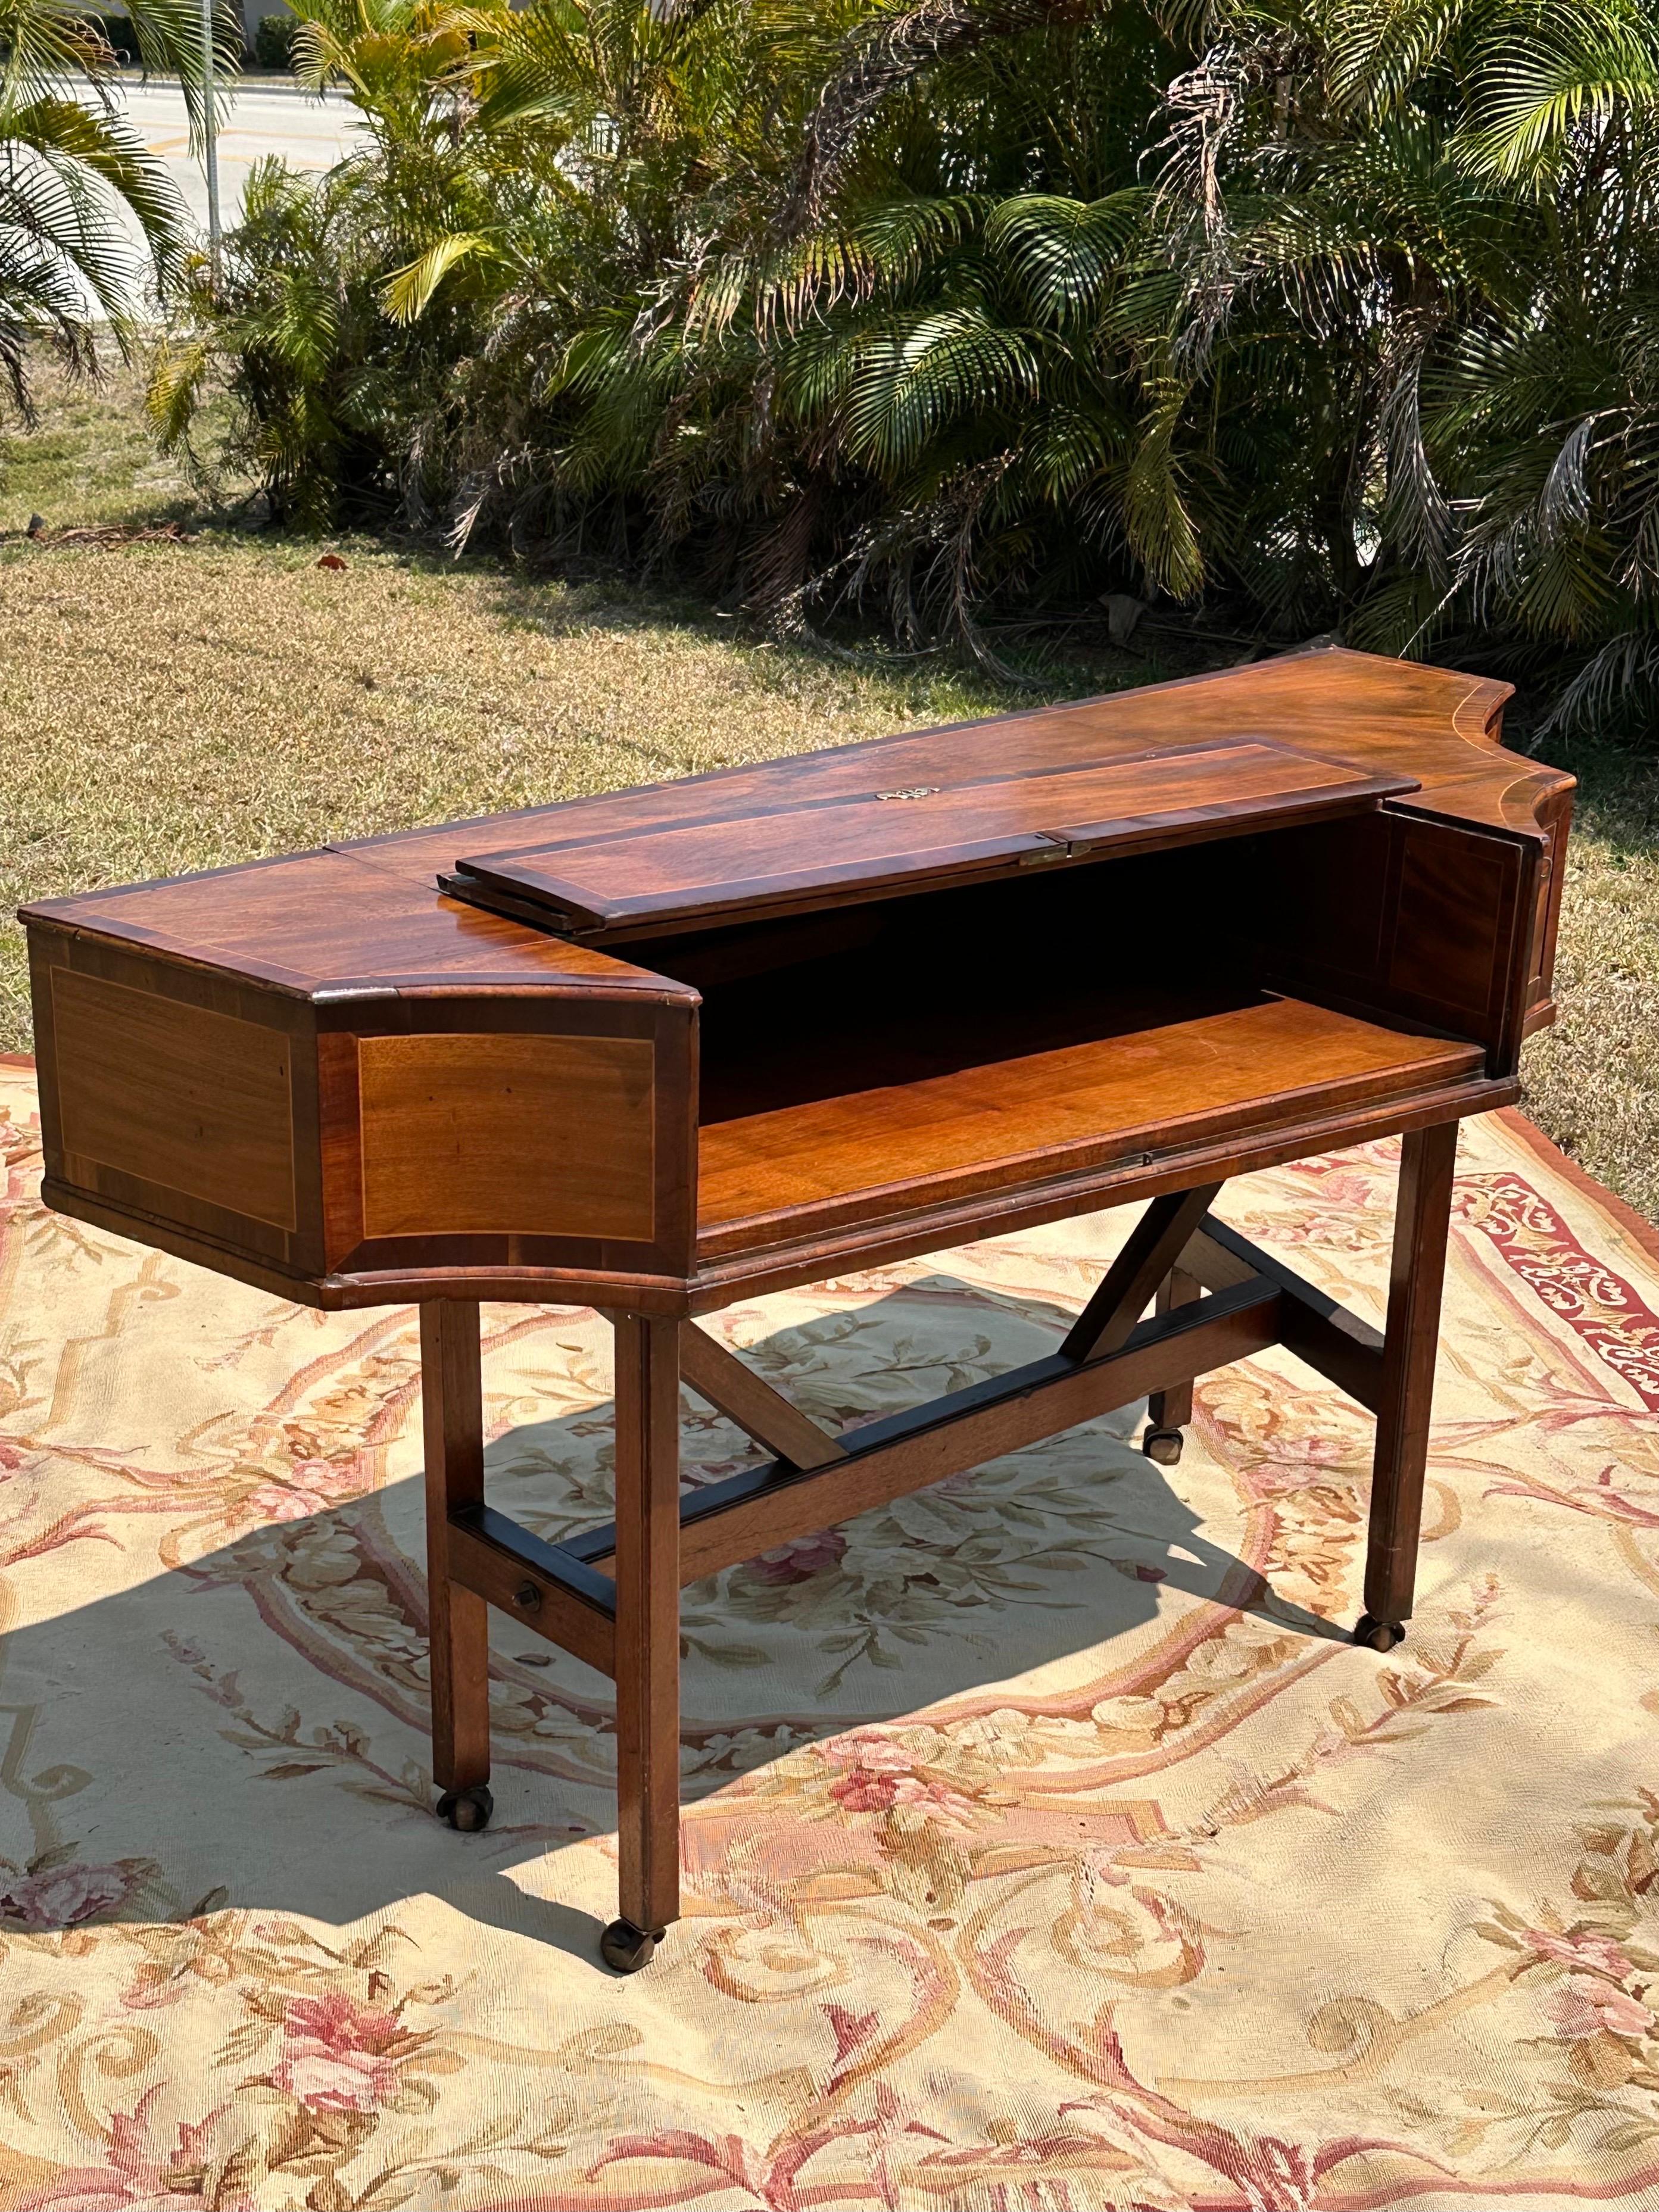 Baroque English 18th C. Spinet Case by Crang & Hancock London Converted Writing Desk For Sale